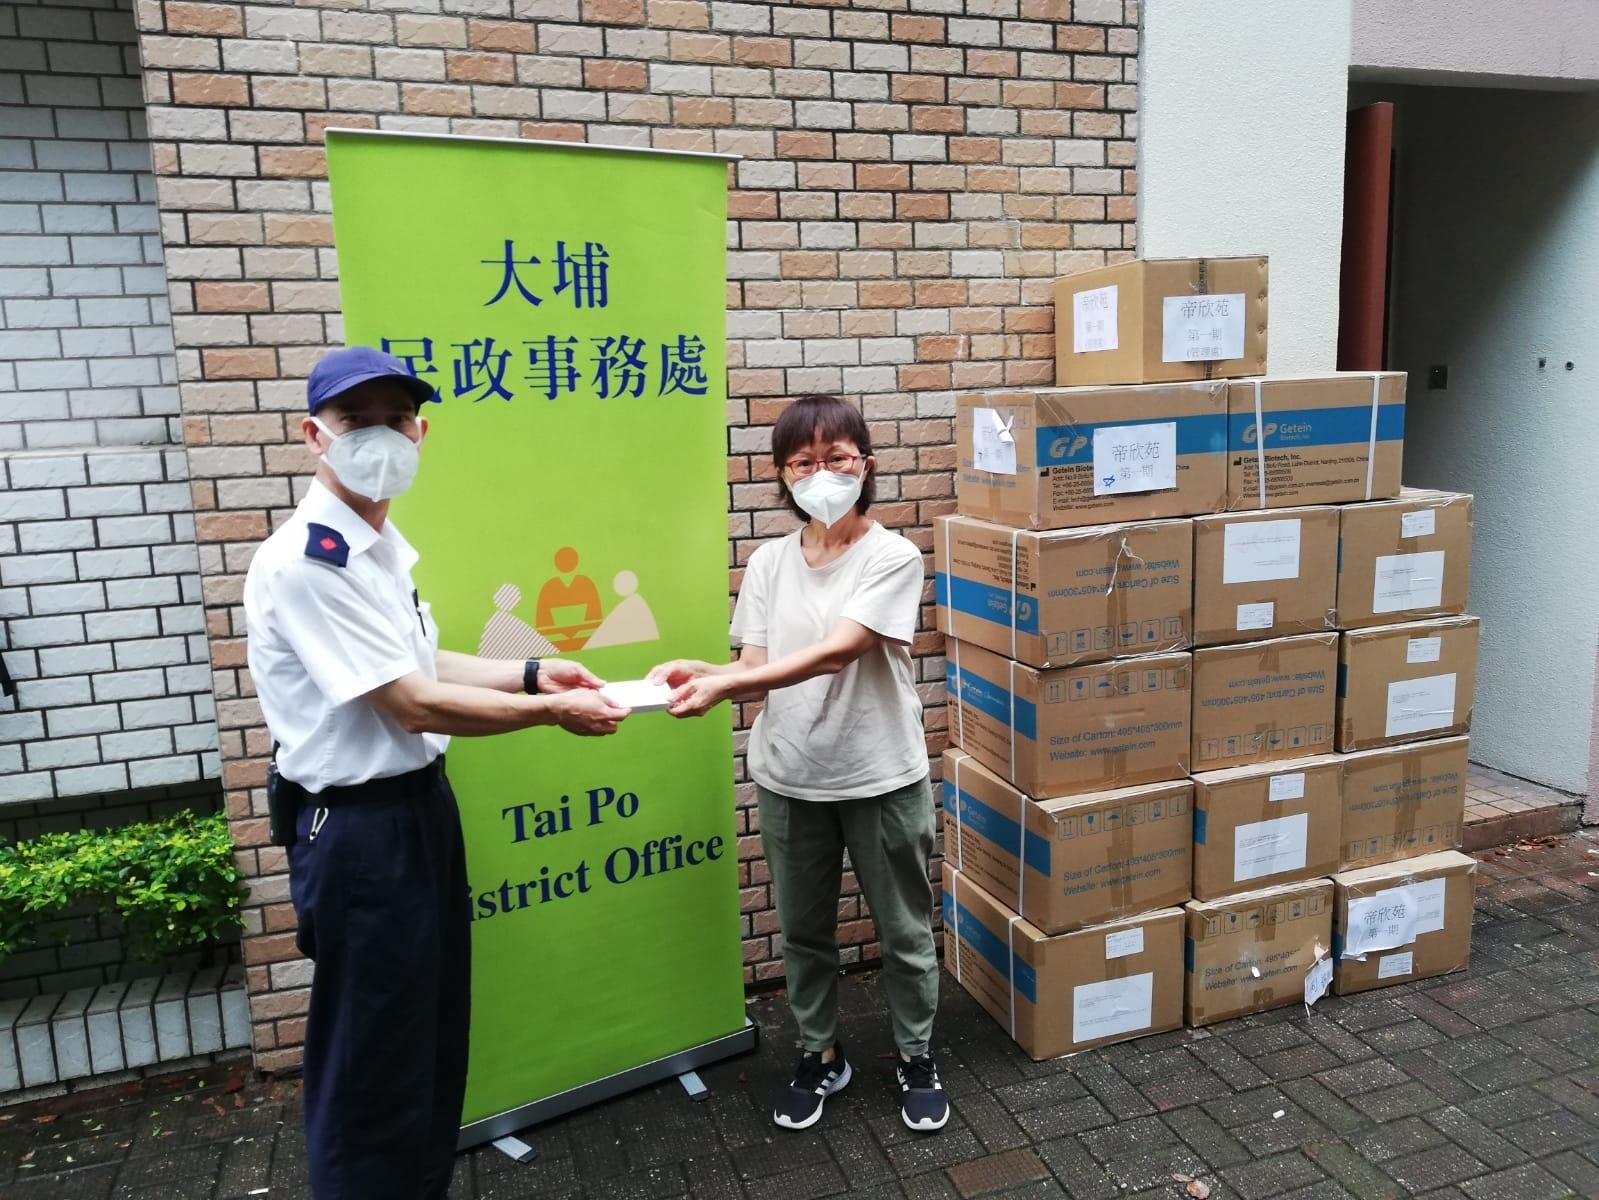 The Tai Po District Office today (June 30) distributed COVID-19 rapid test kits to households, cleansing workers and property management staff living and working in Parc Versailles for voluntary testing through the property management company.